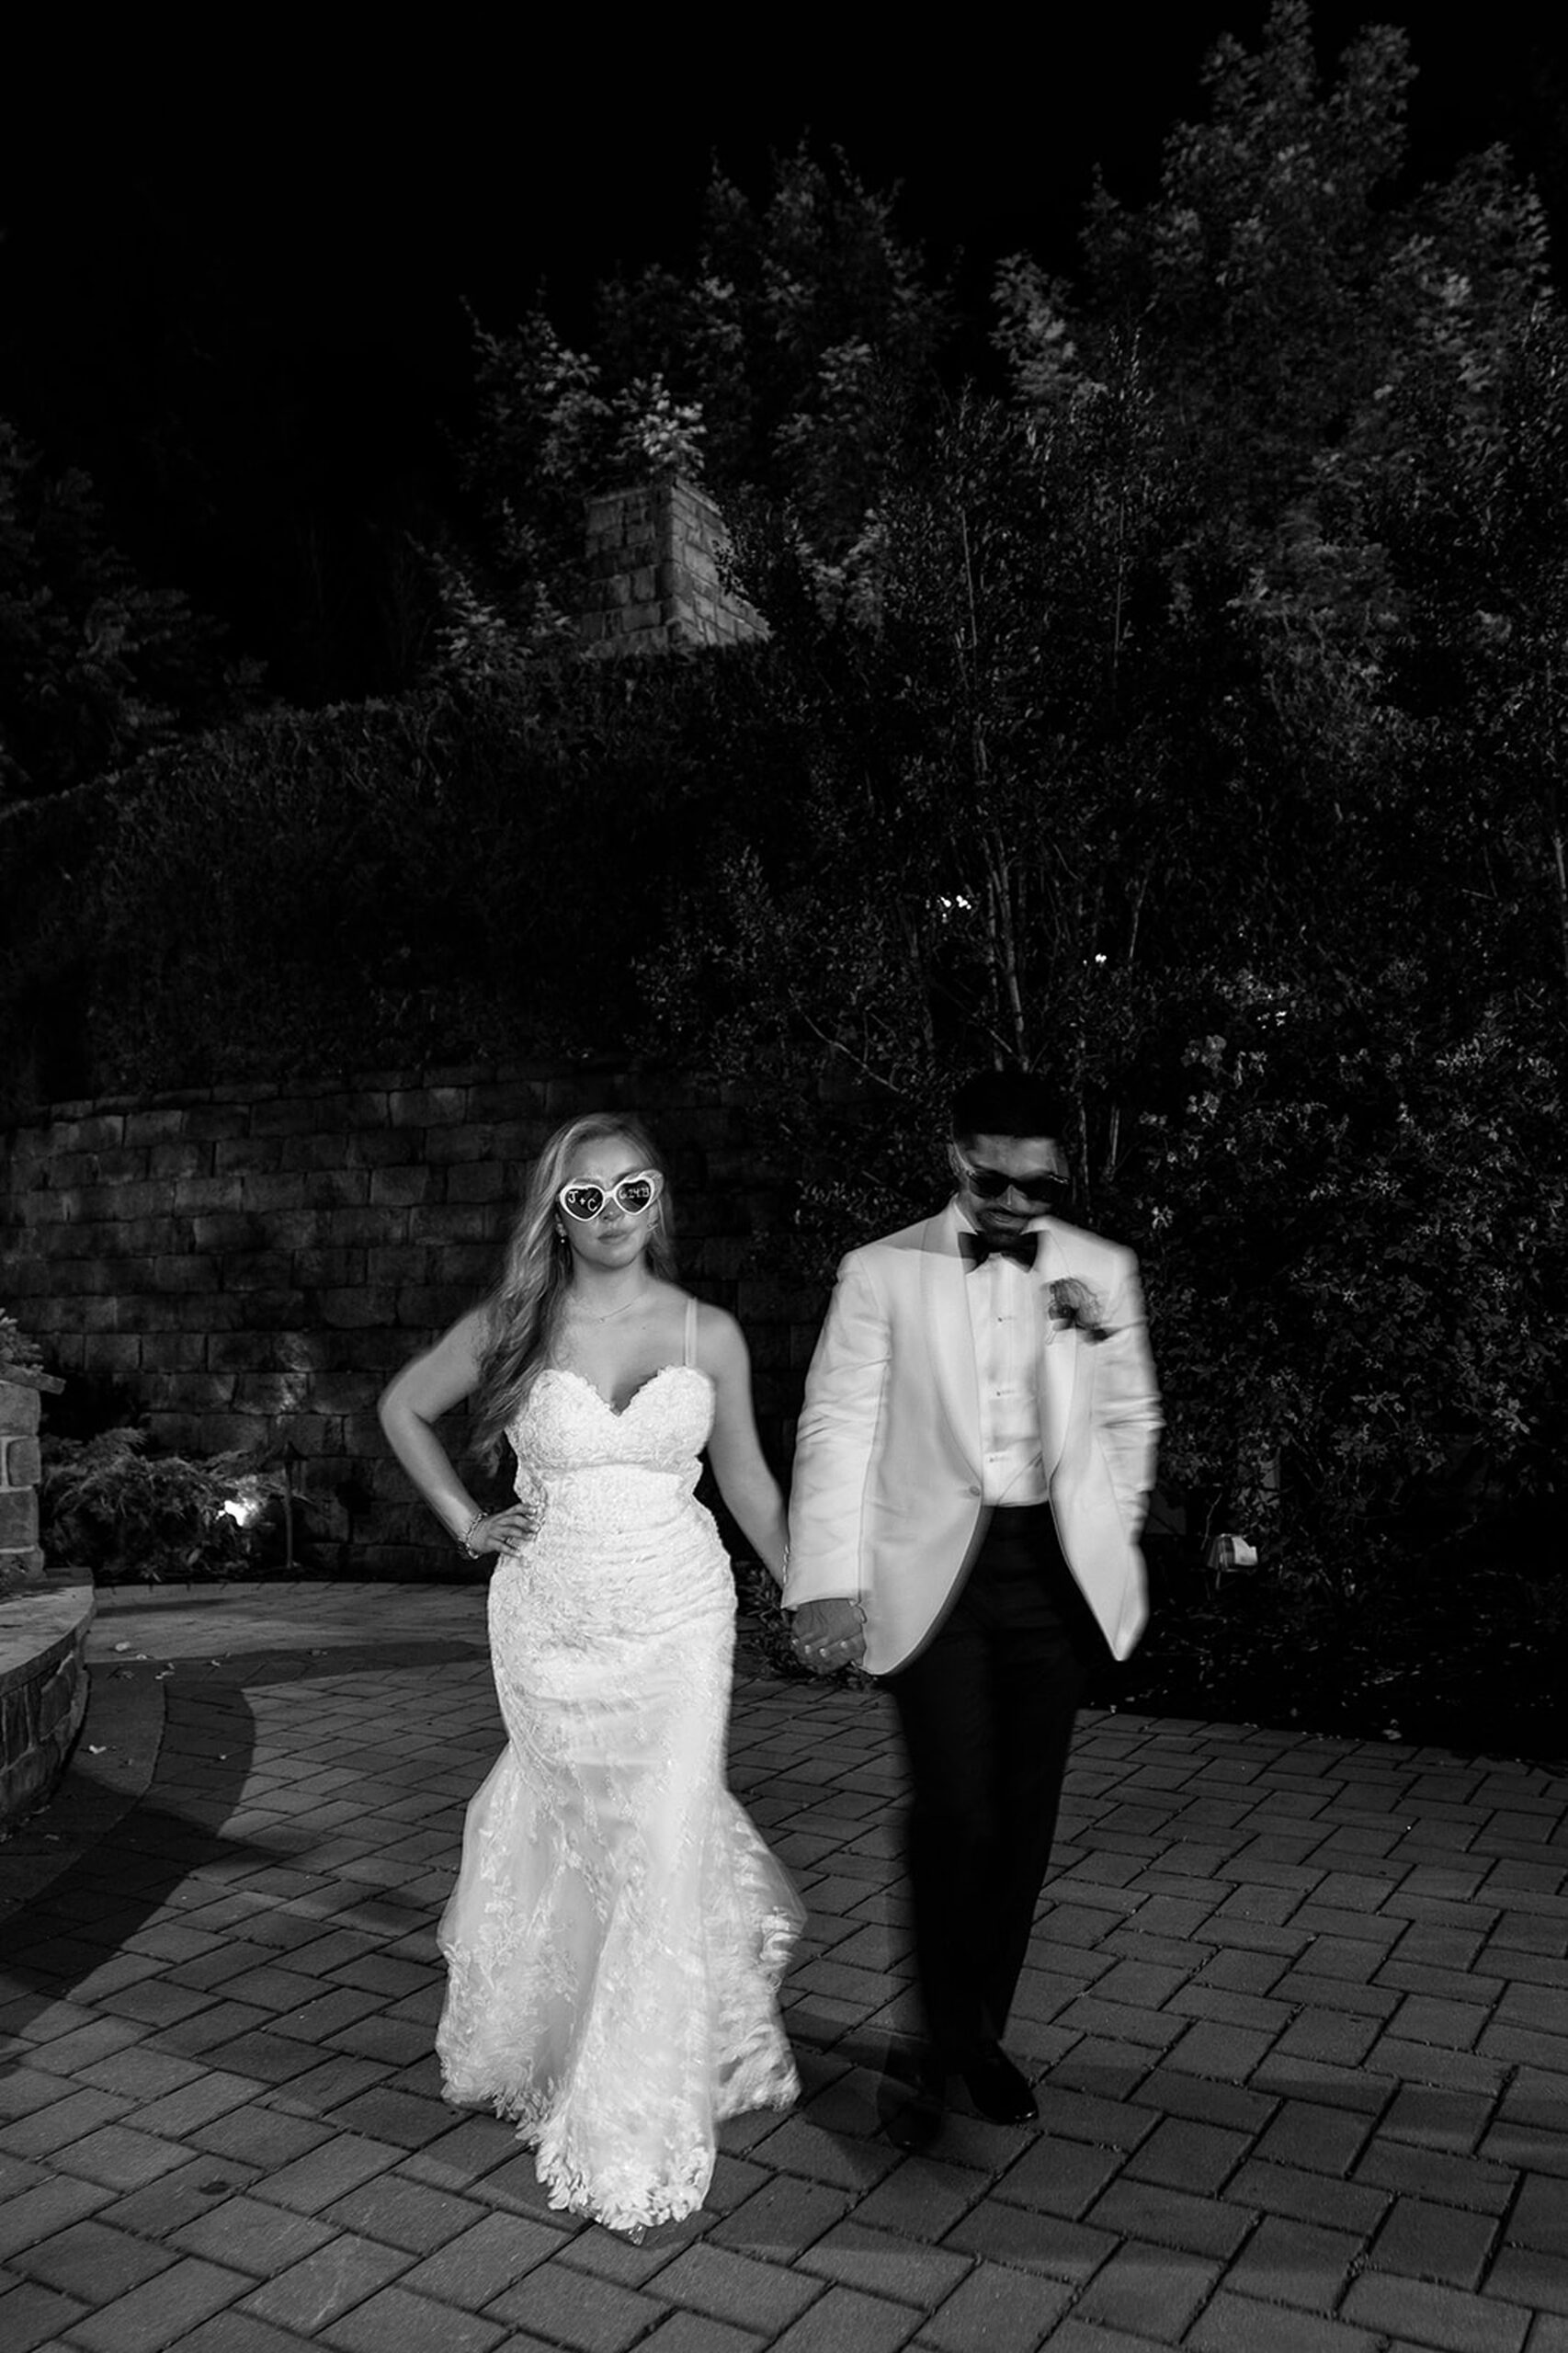 Newlyweds wear large sunglasses while walking hand in hand through a garden patio